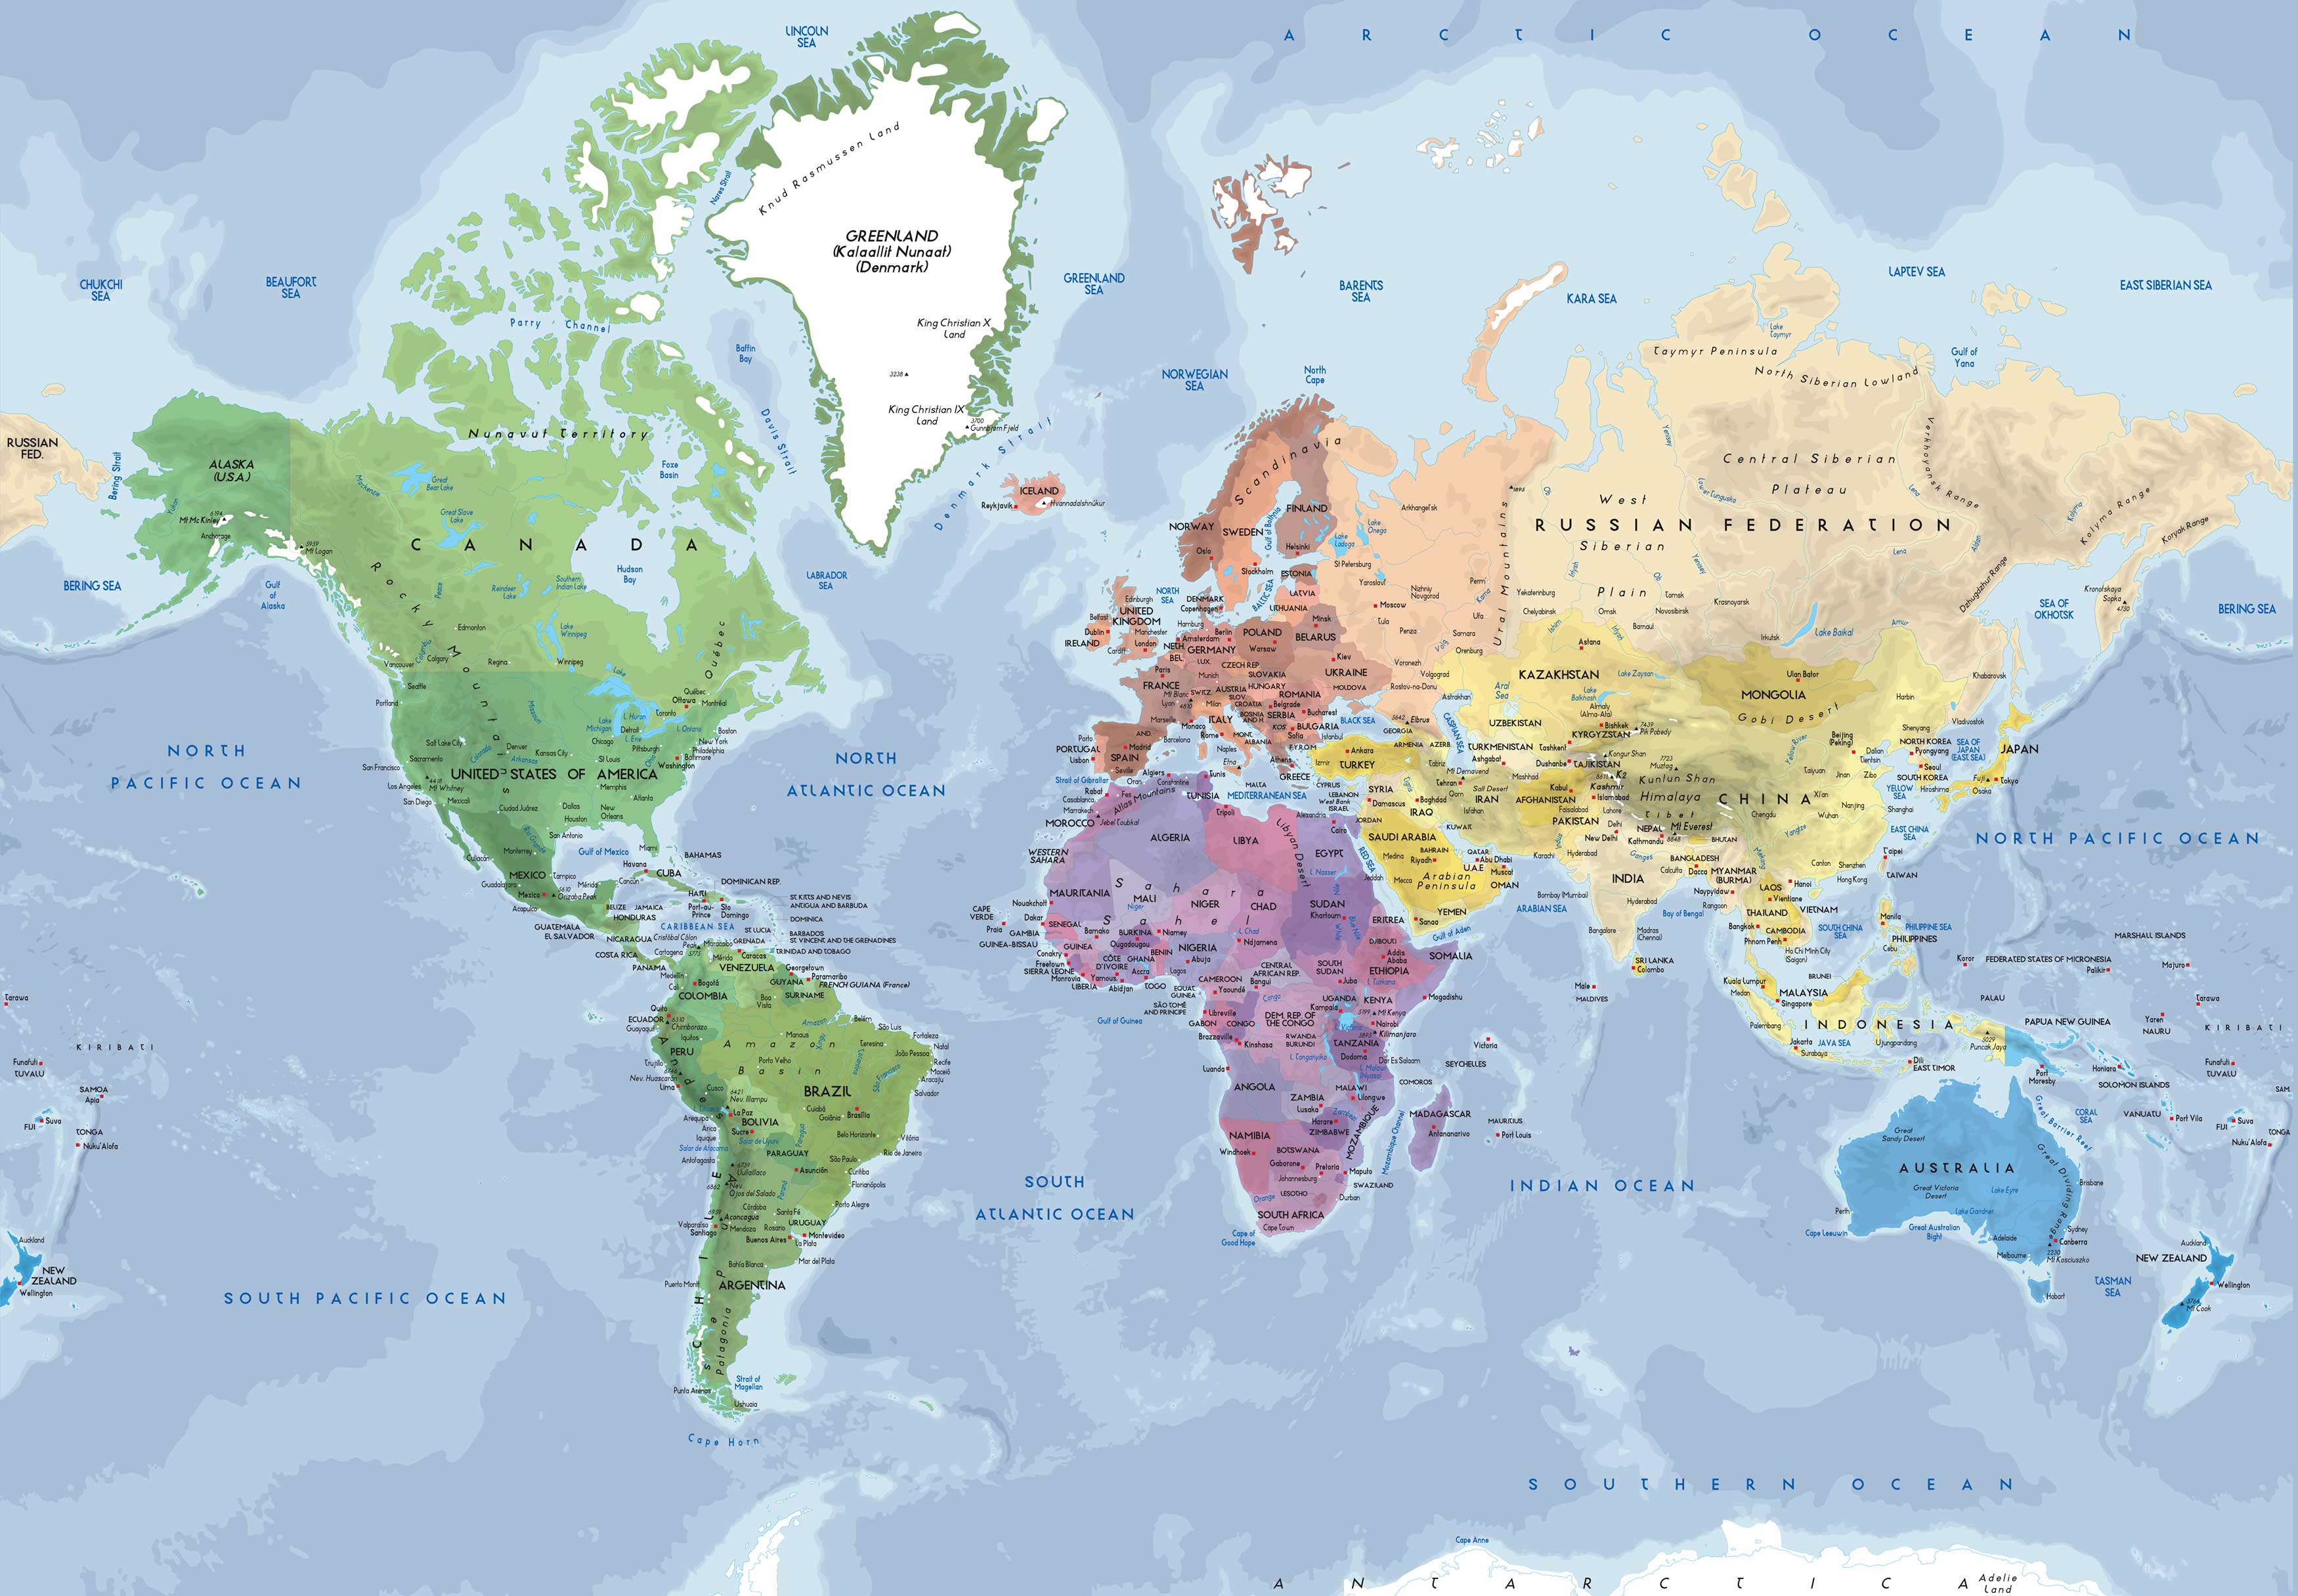 The World Political Map